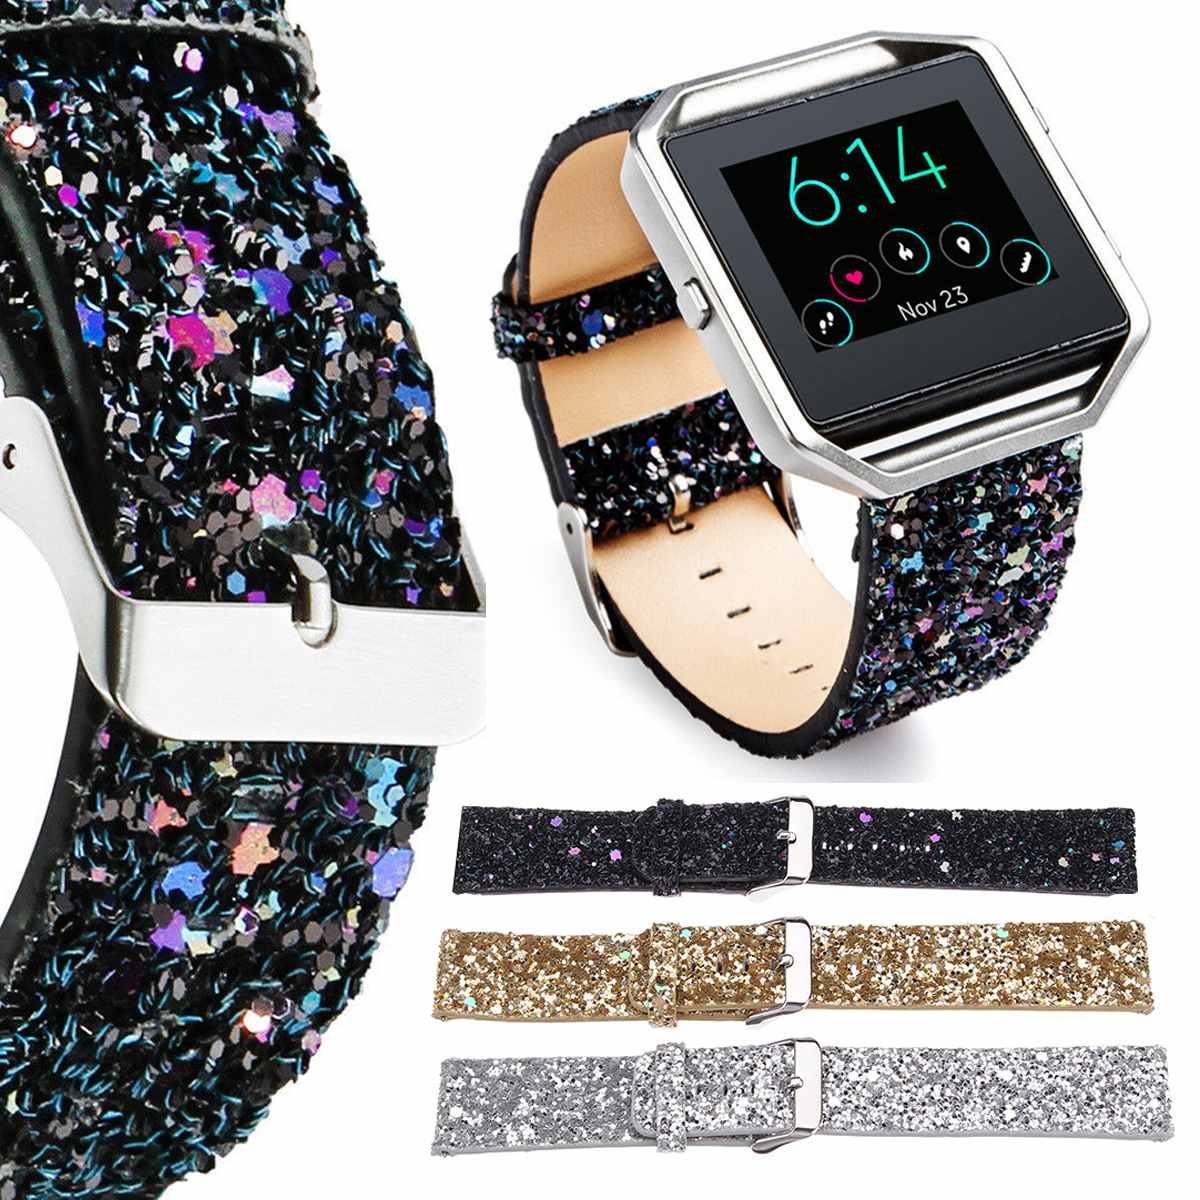 ✗┅♦ Luxury Leather Wrist Watch Band Strap For Fitbit Blaze Activity Fitness Tracker Watch Smart Accessories Silver Gold Black Colors